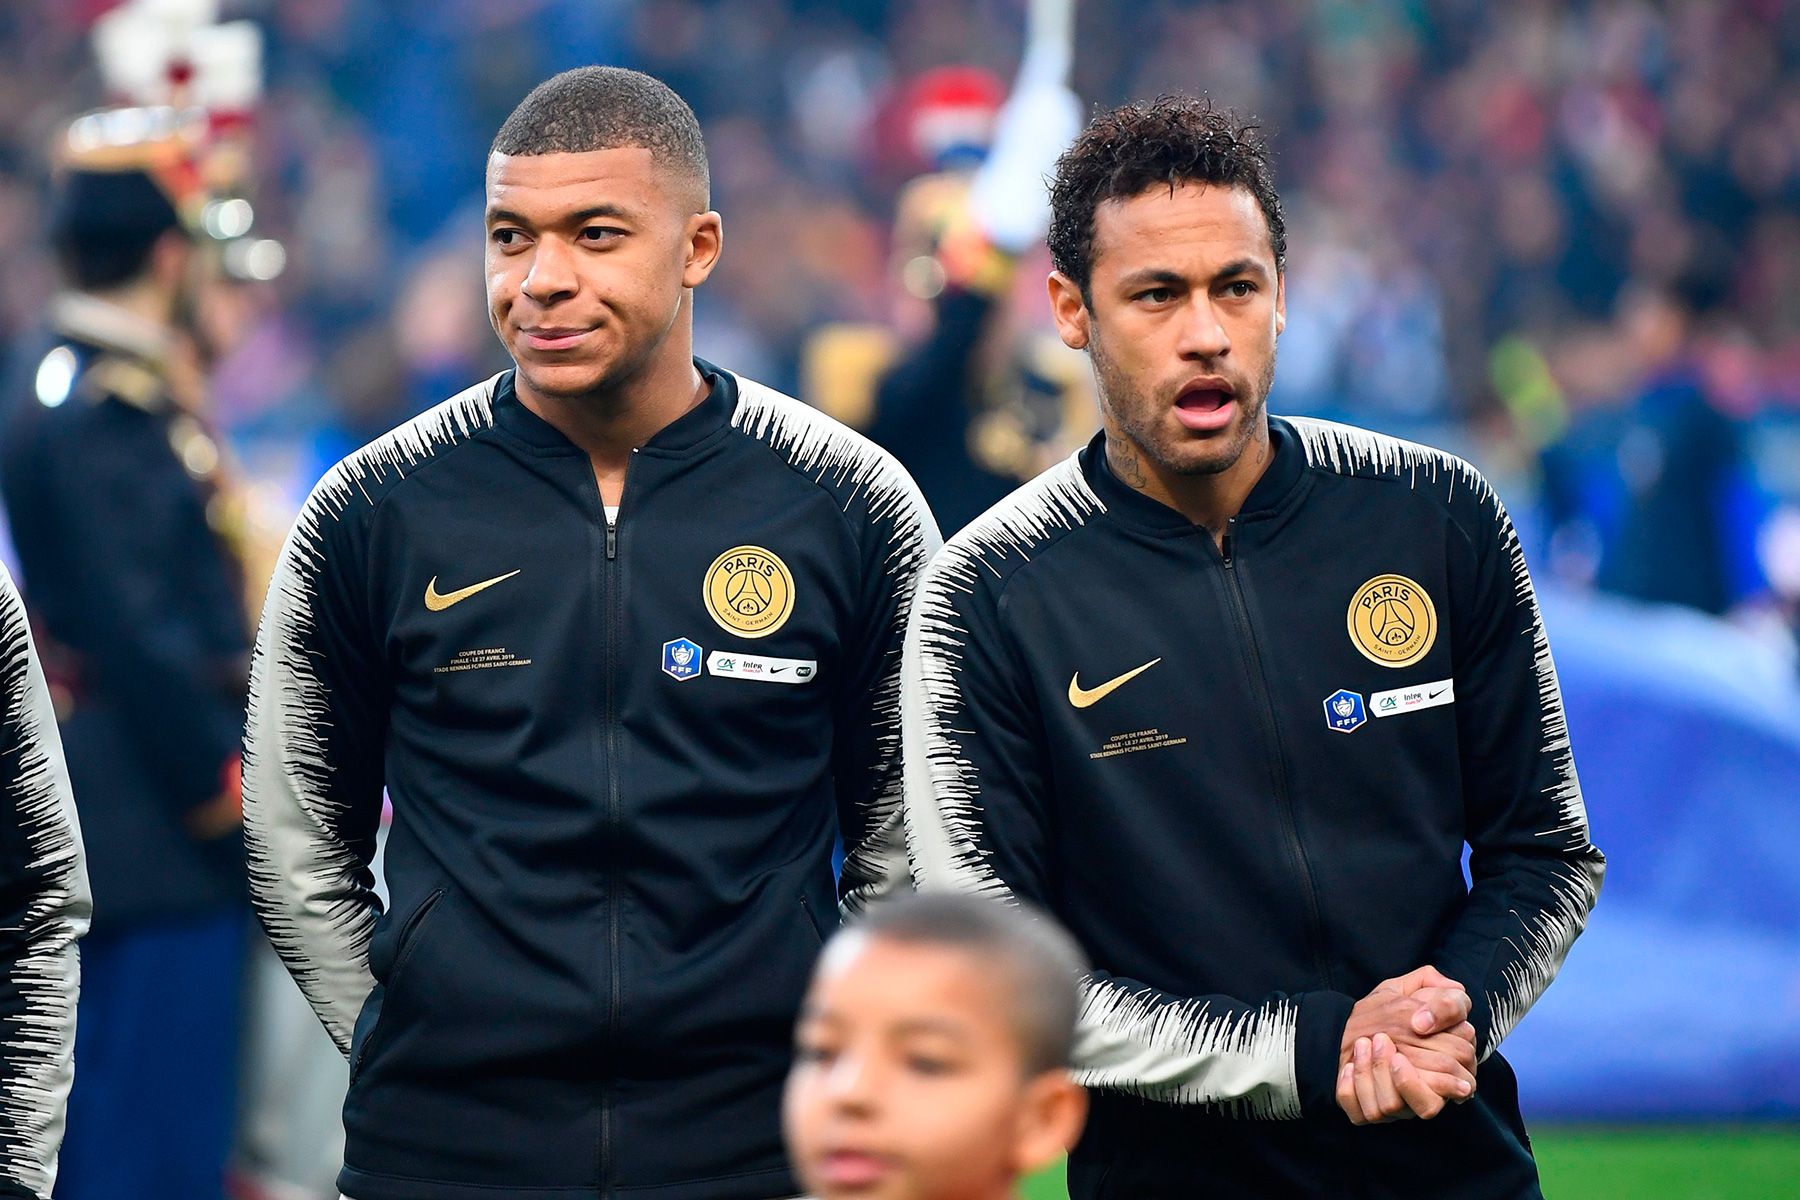 Mbappé And Neymar pose before a match with the PSG